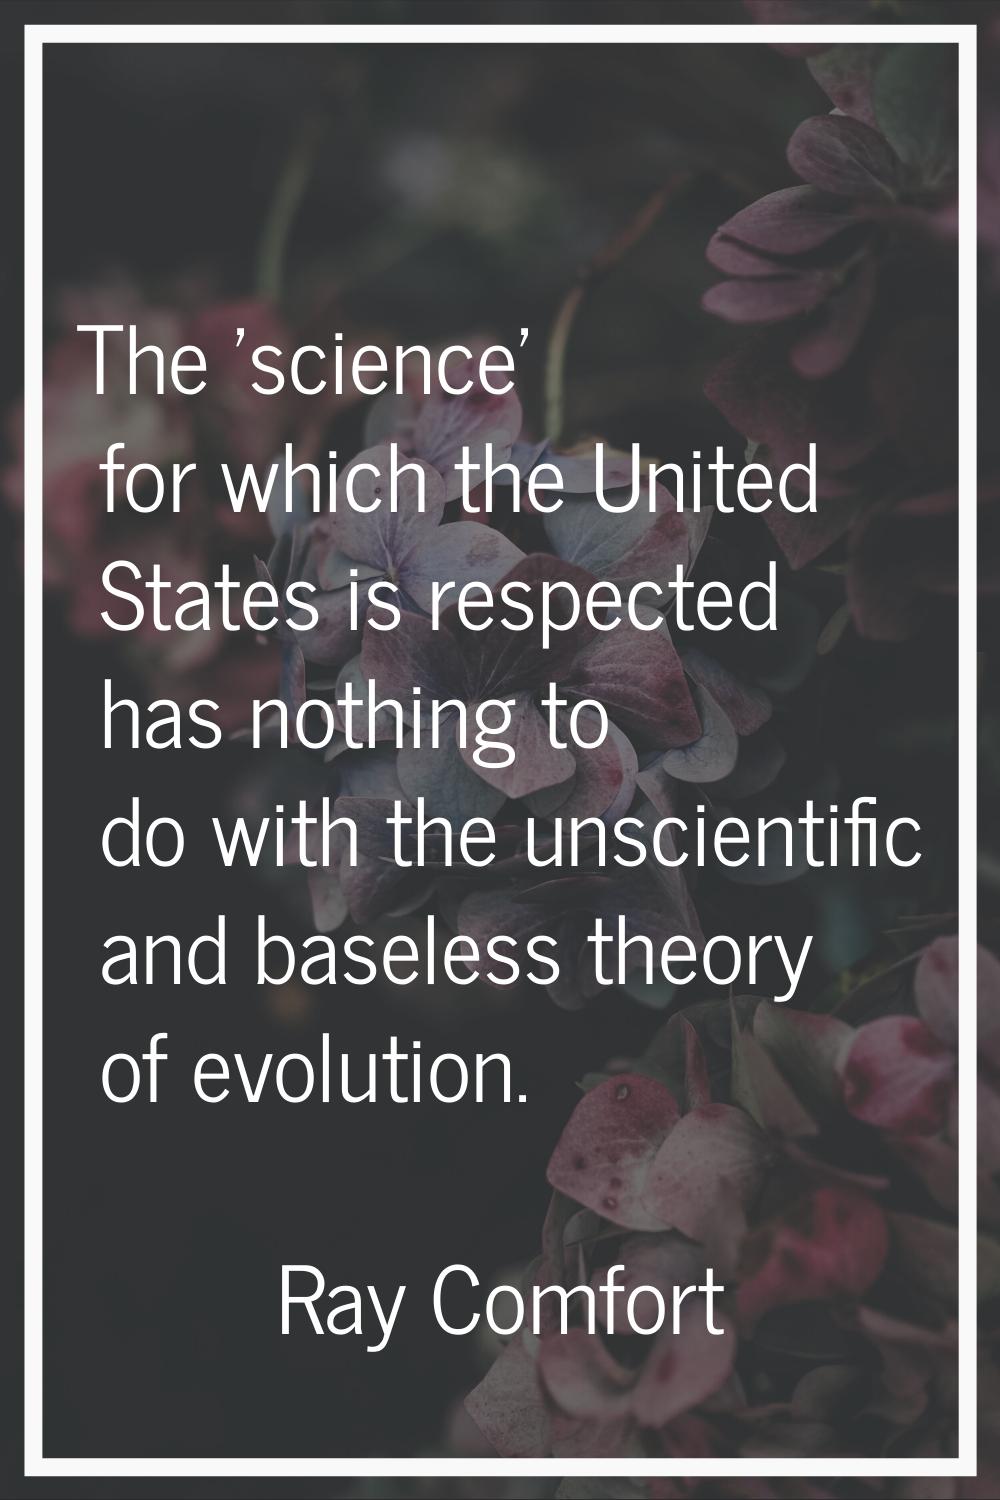 The 'science' for which the United States is respected has nothing to do with the unscientific and 